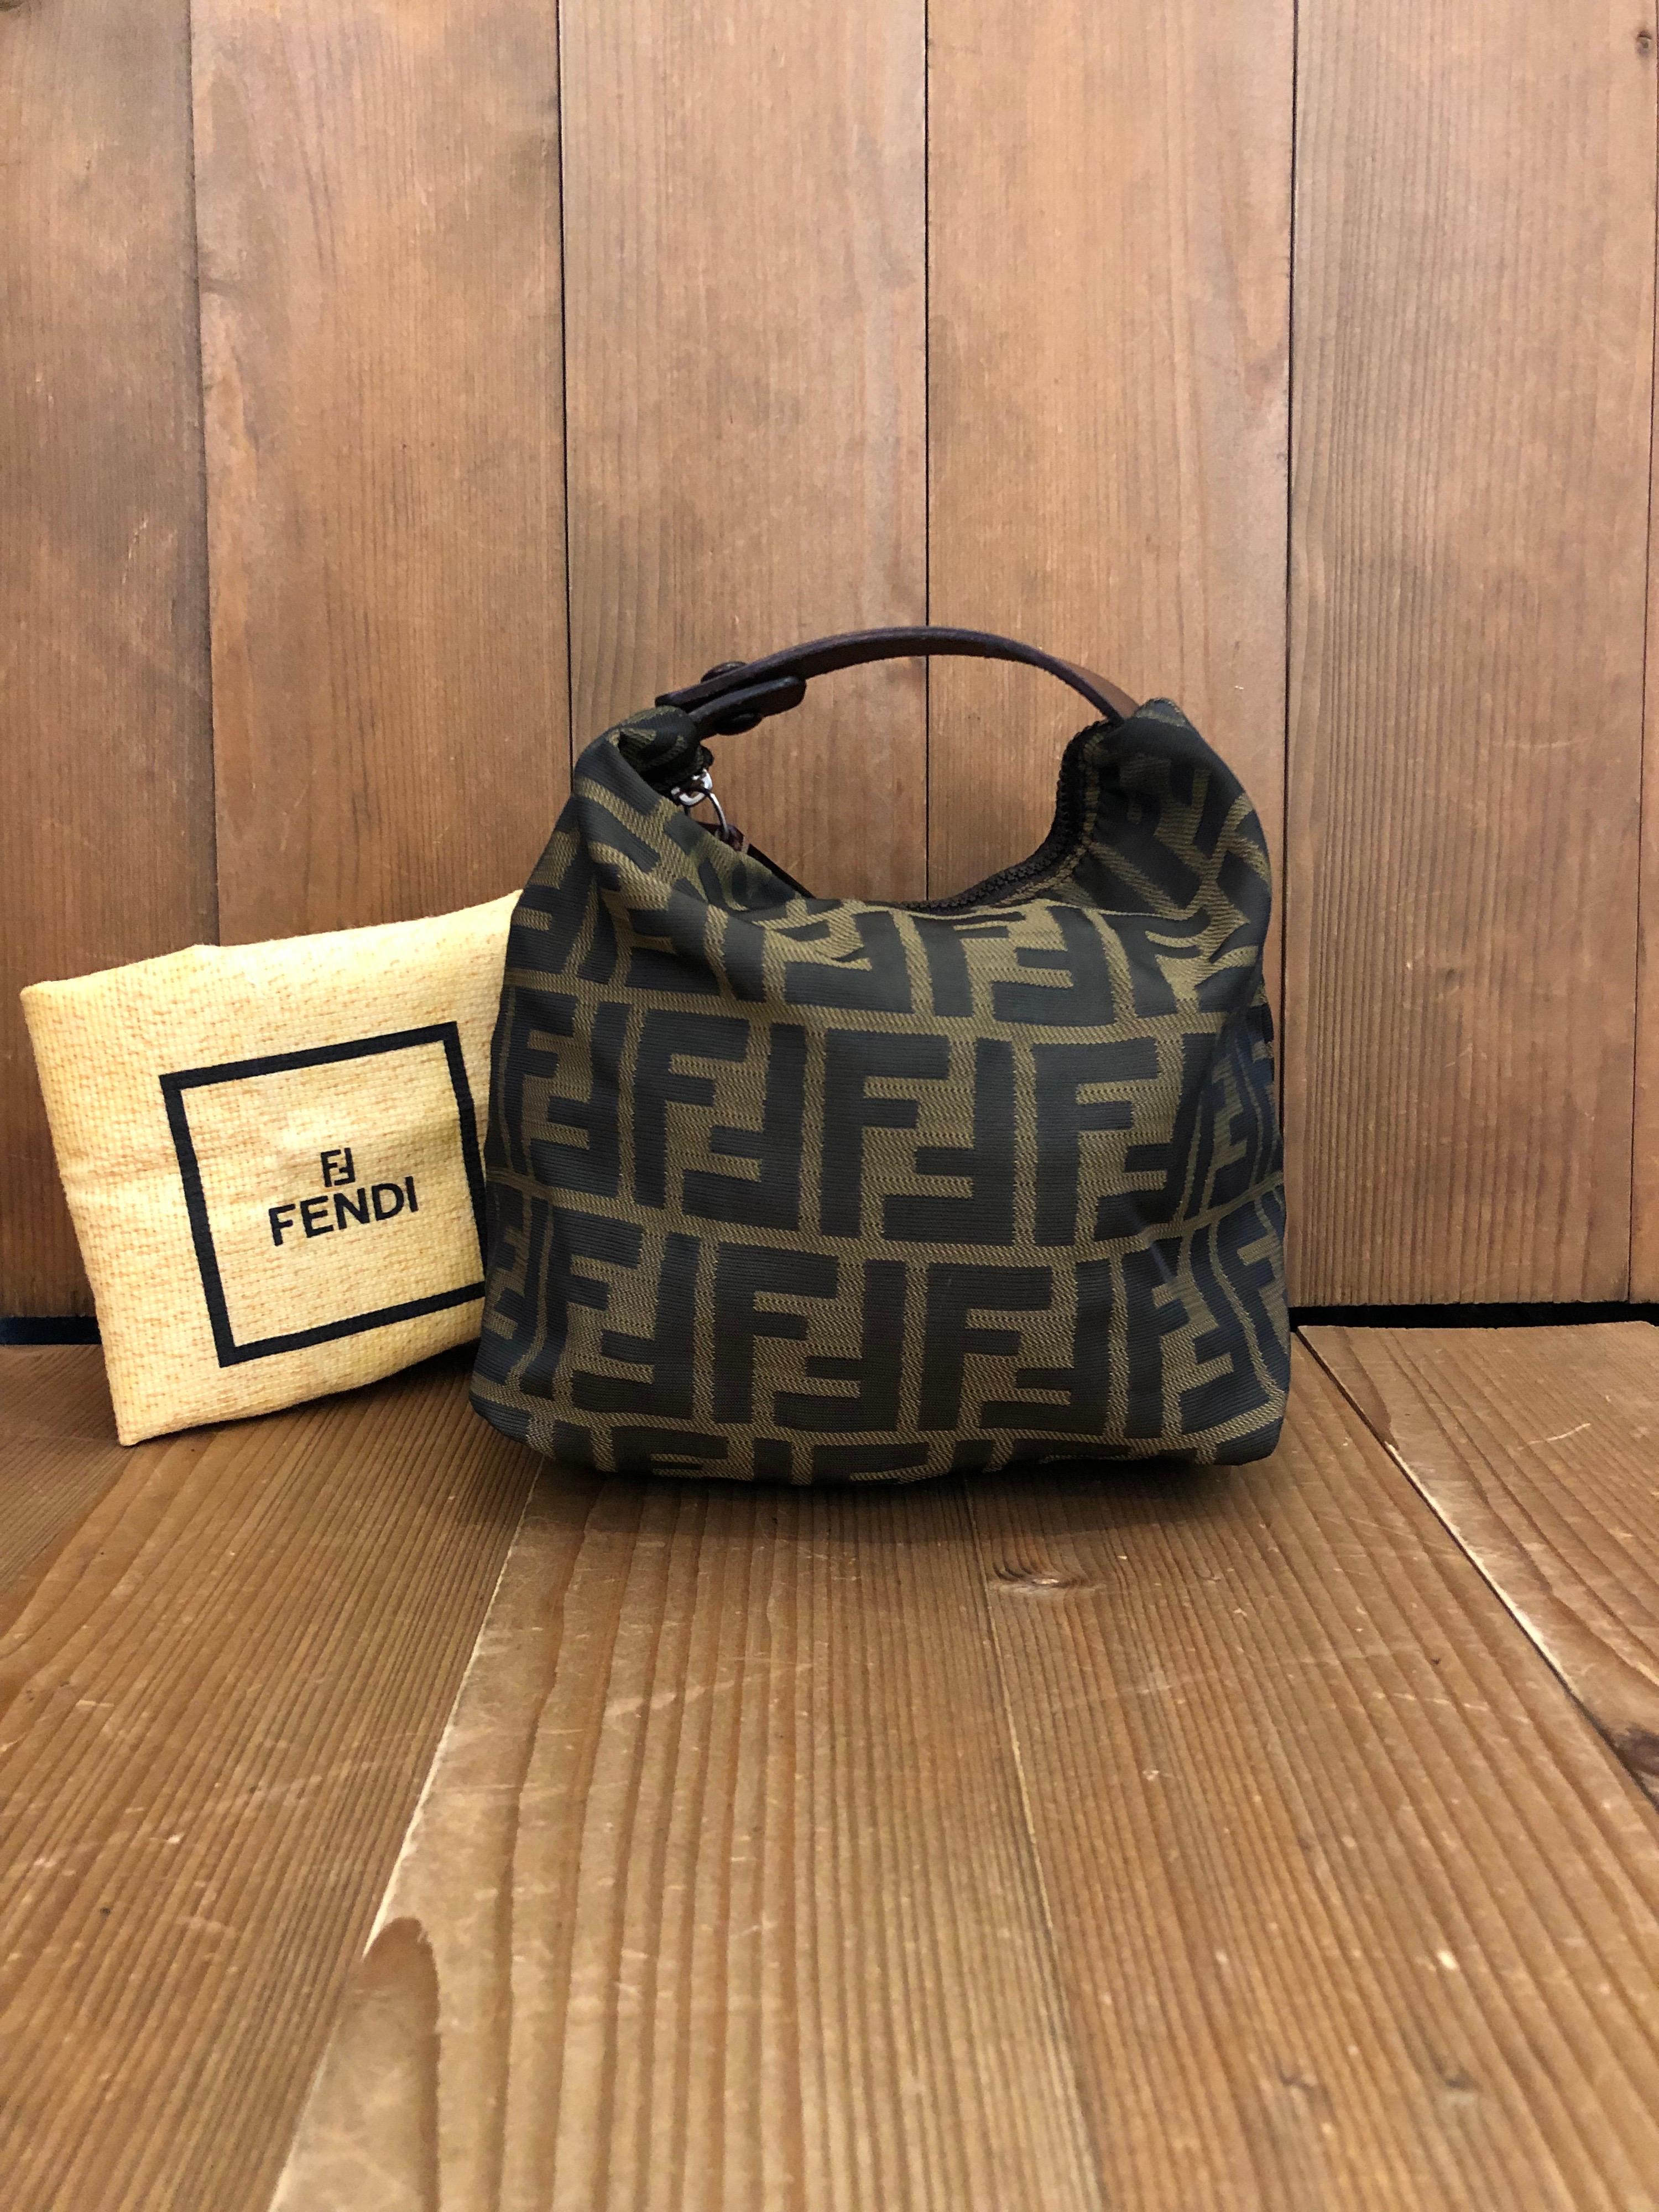 1990s Fendi mini pouch handbag in Fendi's iconic brown Zucca jacquard and leather. Made in Italy. Measures 7 x 6 x 4 inches Handle drop 2 inches. Comes with dust bag.

Condition - Minor signs of wear. Generally in good condition.